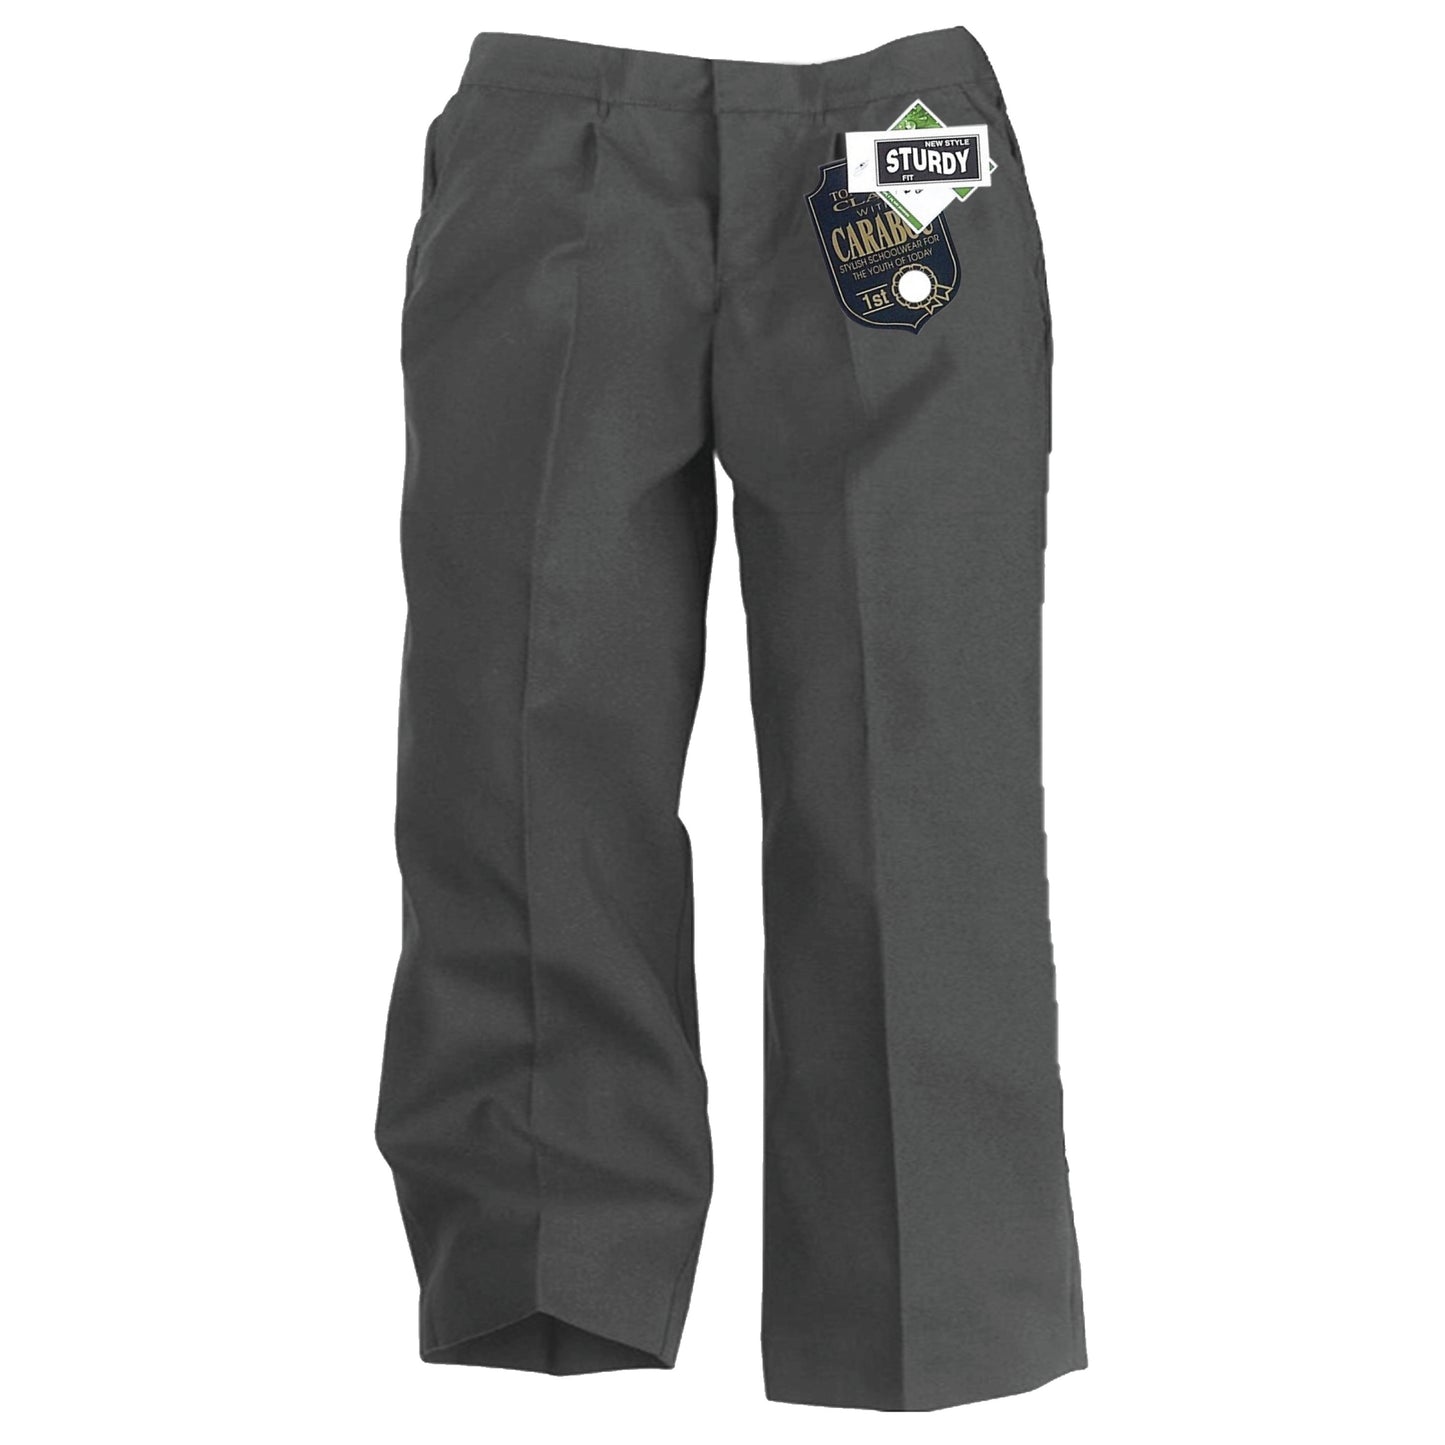 CARABOU BOYS STURDY FIT SCHOOL TROUSERS